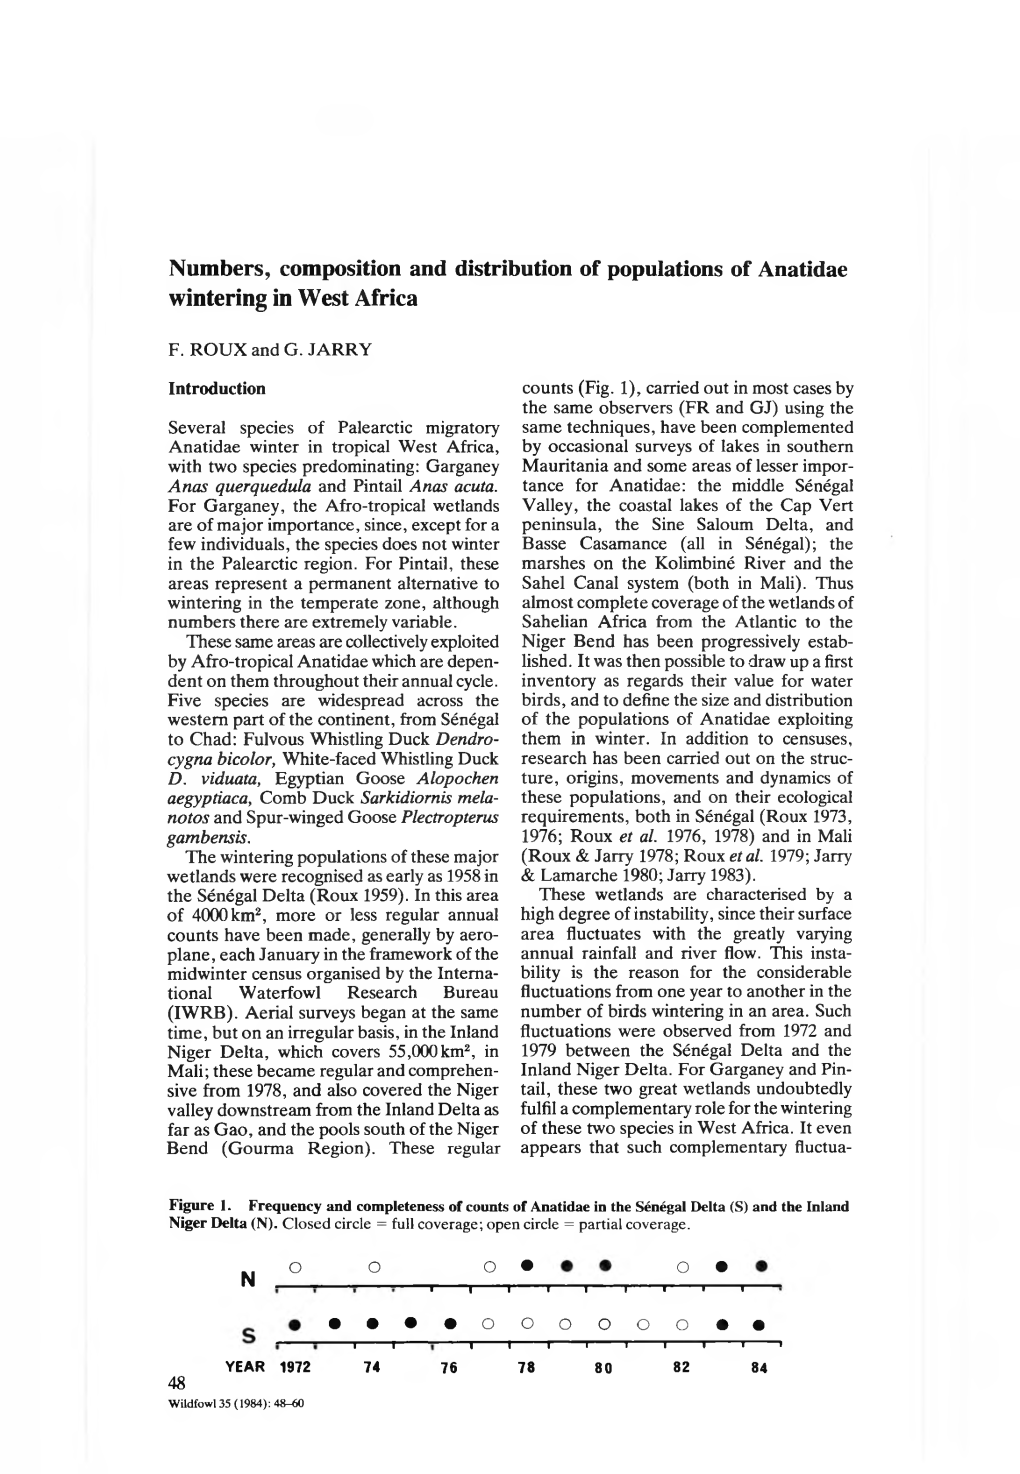 Numbers, Composition and Distribution of Populations of Anatidae Wintering in West Africa